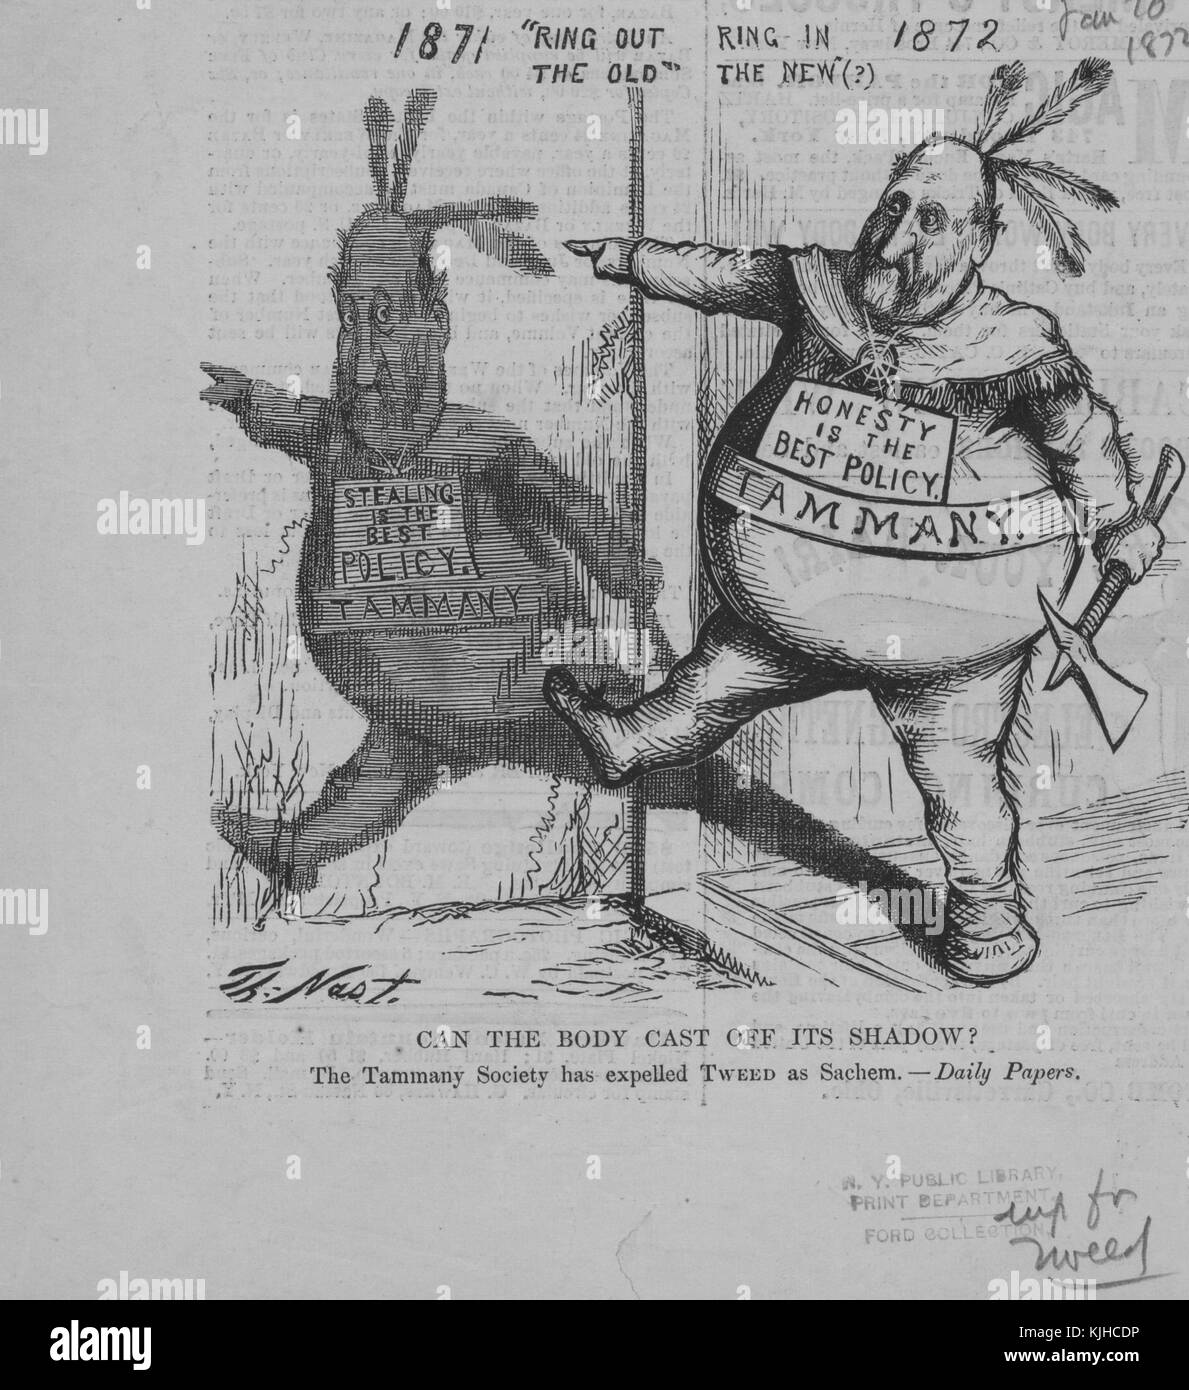 A political cartoon featuring the image of William M Tweed, the image questions whether the Tammy Society political machine could reform after removing Tweed from power, Tweed was a notoriously corrupt figure who is believed to have stolen between 25 and 200 million dollars while controlling New York politics, New York, 1872. From the New York Public Library. Stock Photo